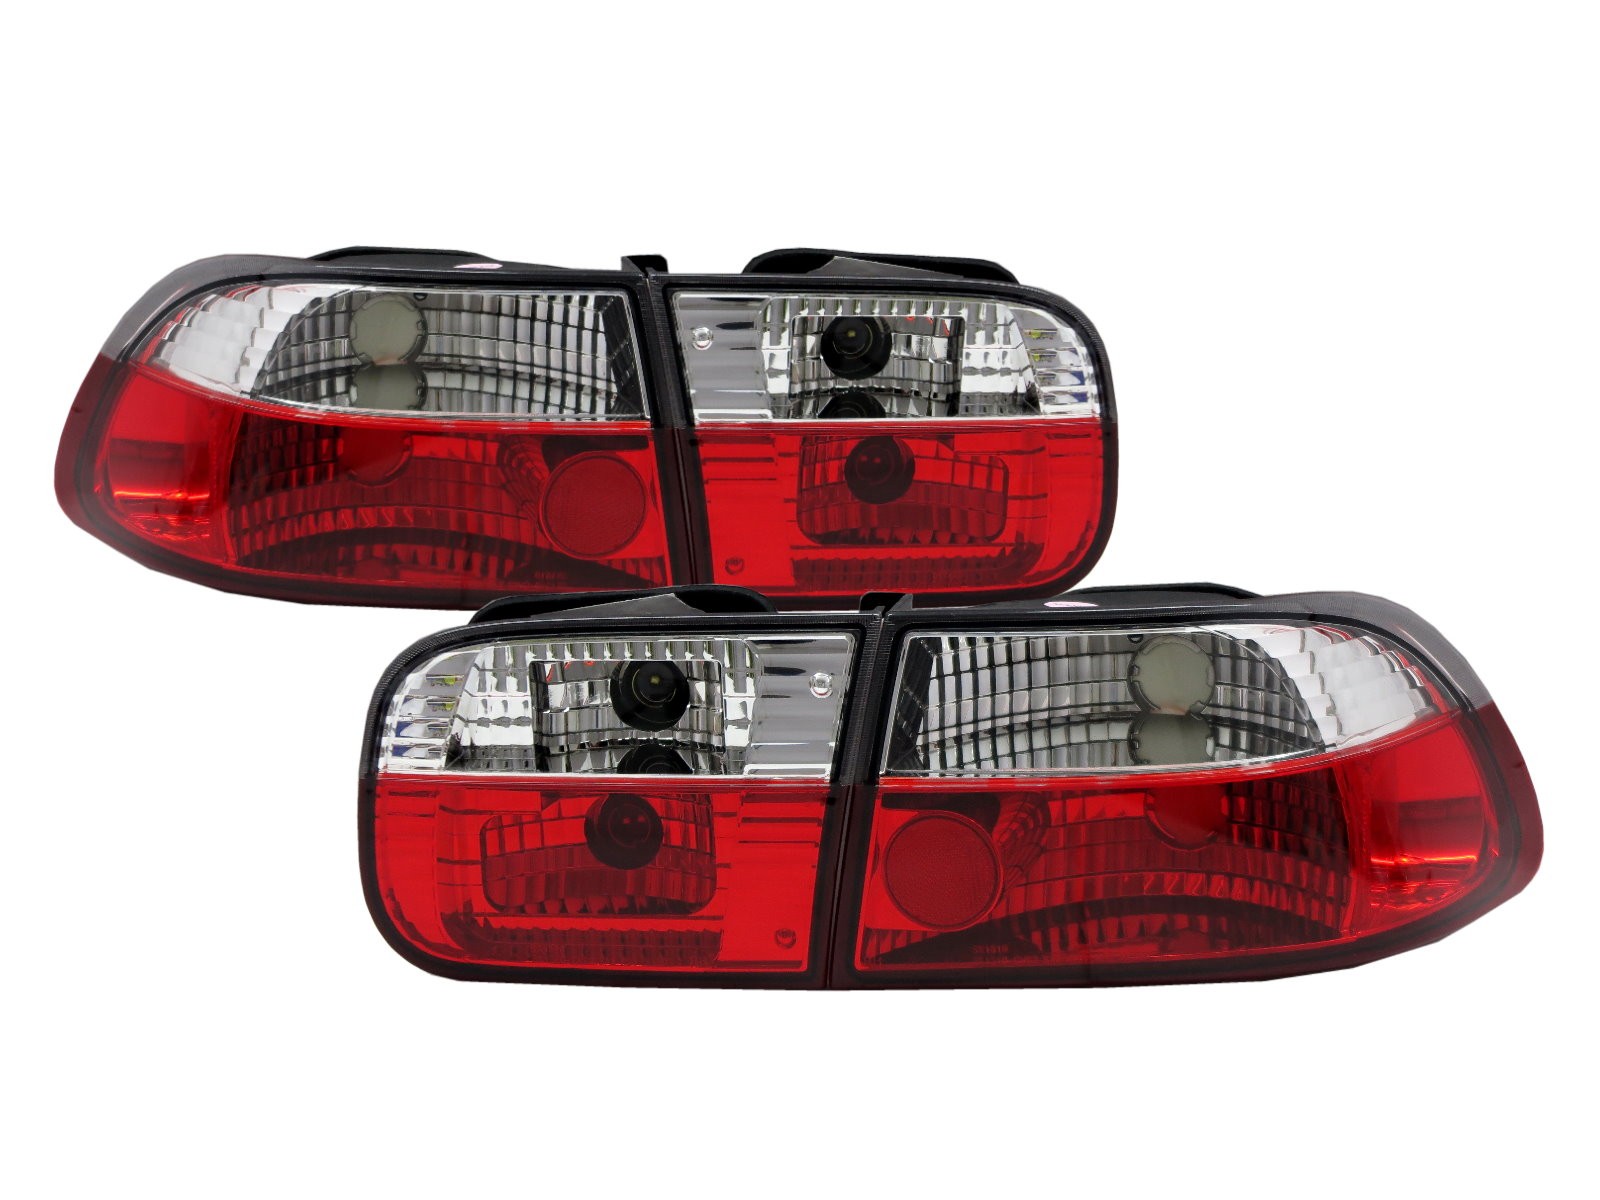 CrazyTheGod CIVIC EG/EH/EJ Fifth generation 1992-1995 Sedan/Coupe 2D/4D Clear Tail Rear Light Red/White for HONDA